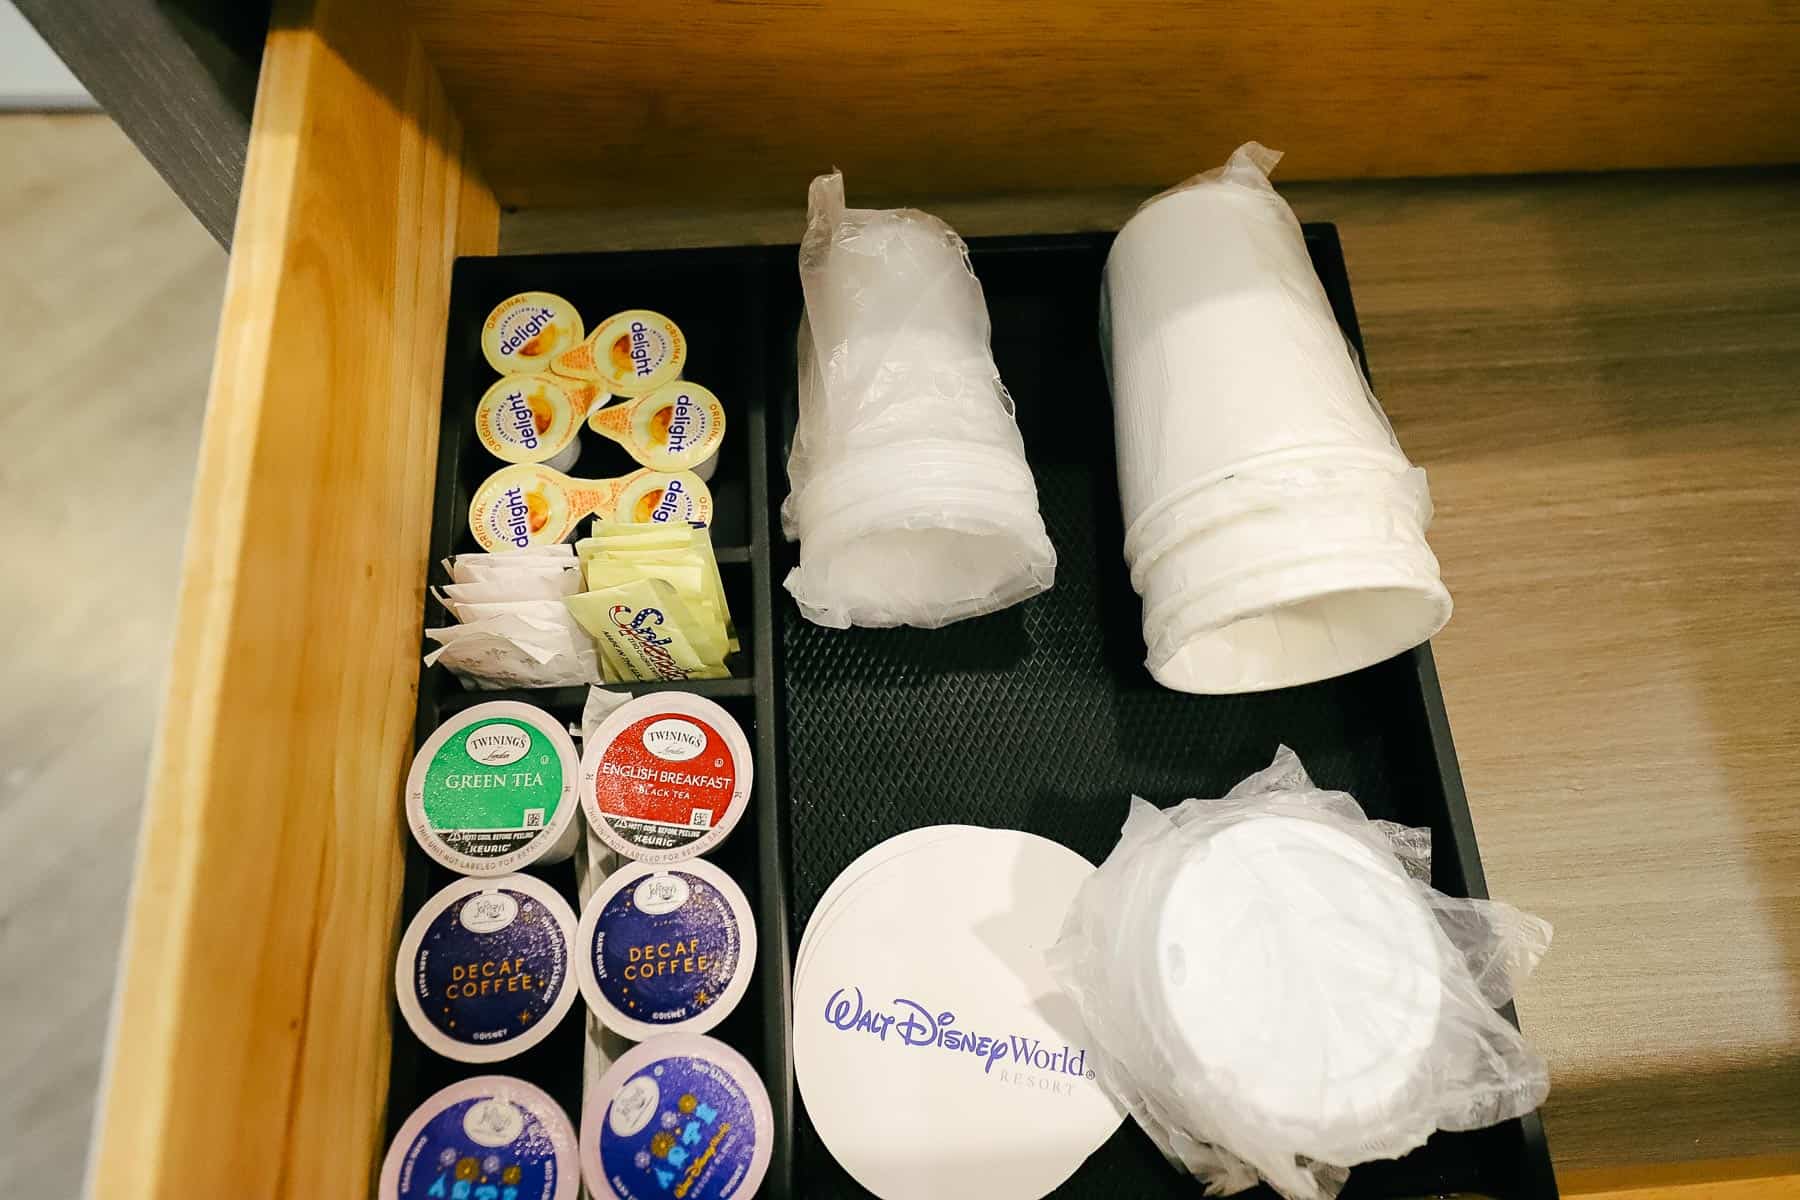 Coffee creamer, sweeteners, and cups provided in the room. 